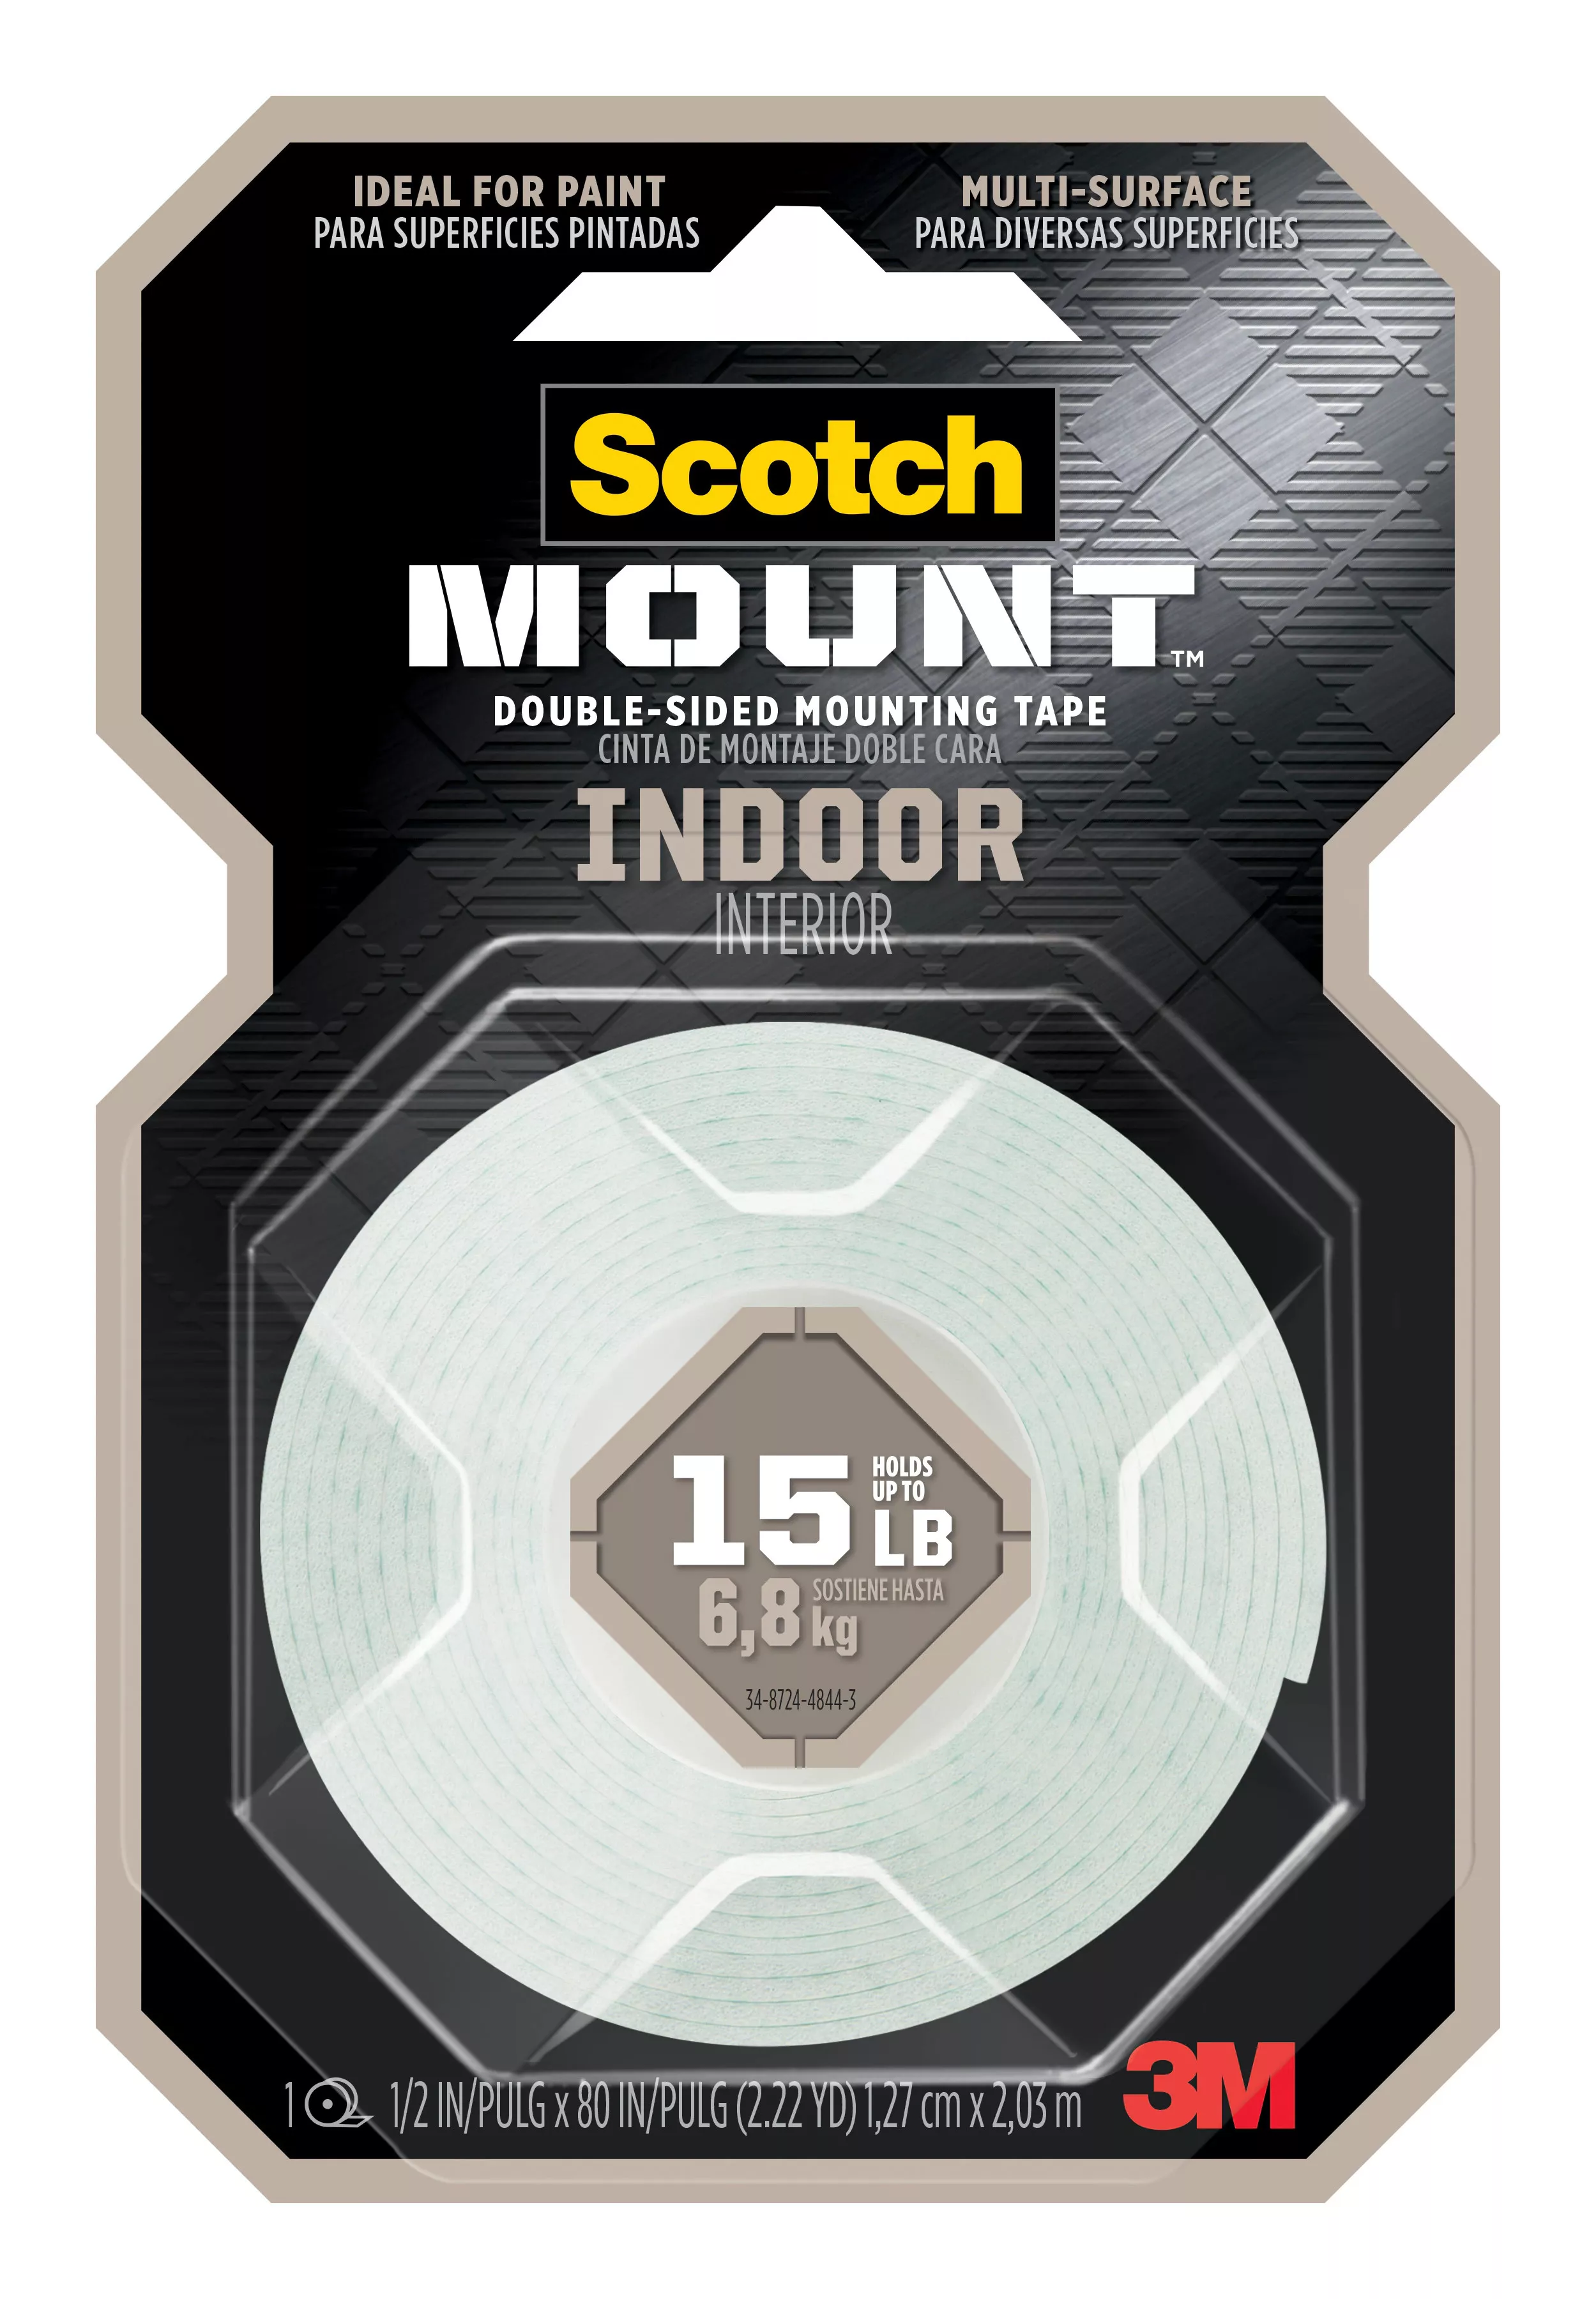 Scotch-Mount™ Indoor Double-Sided Mounting Tape 110H, 1/2 in x 80 in